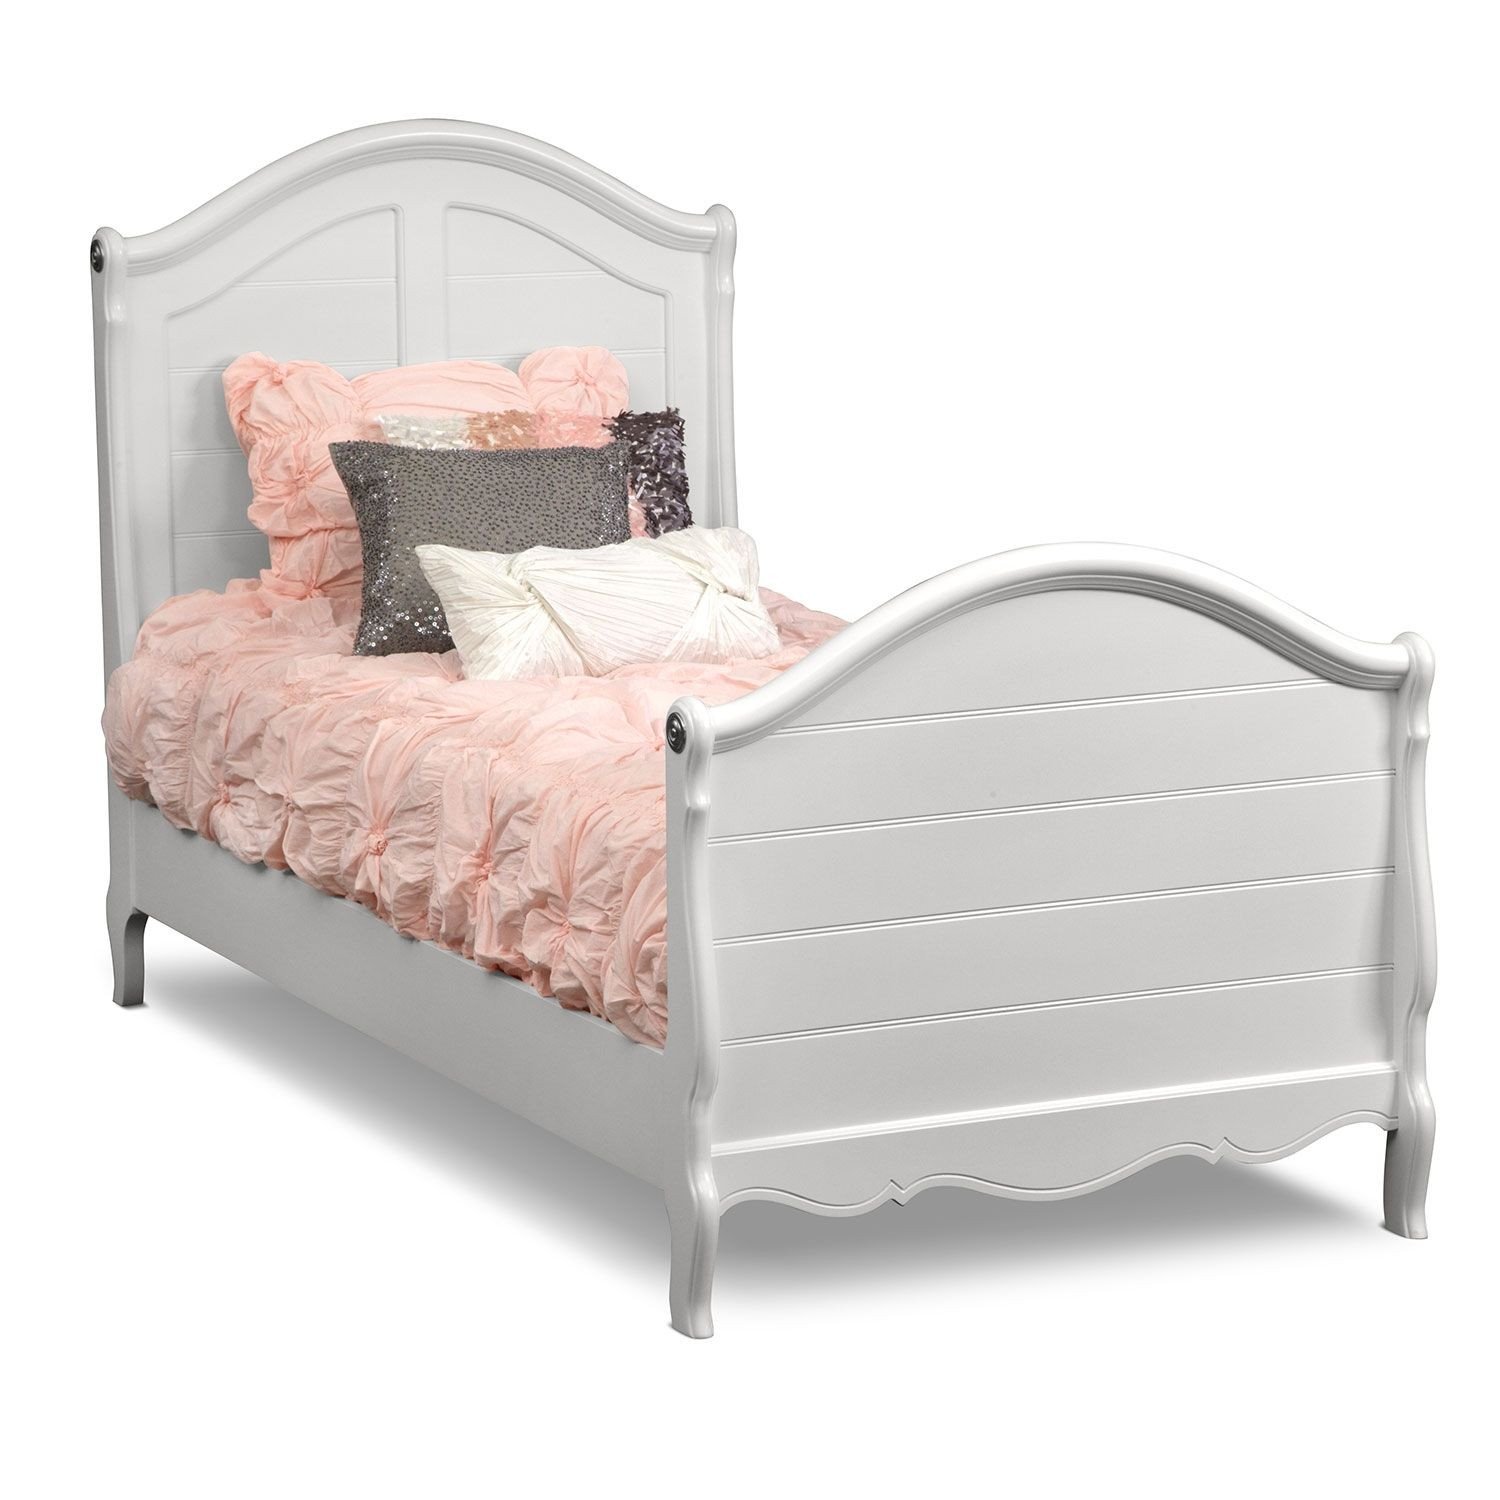 Value City Bedroom Set On Sale Inspirational Carly Twin Bed